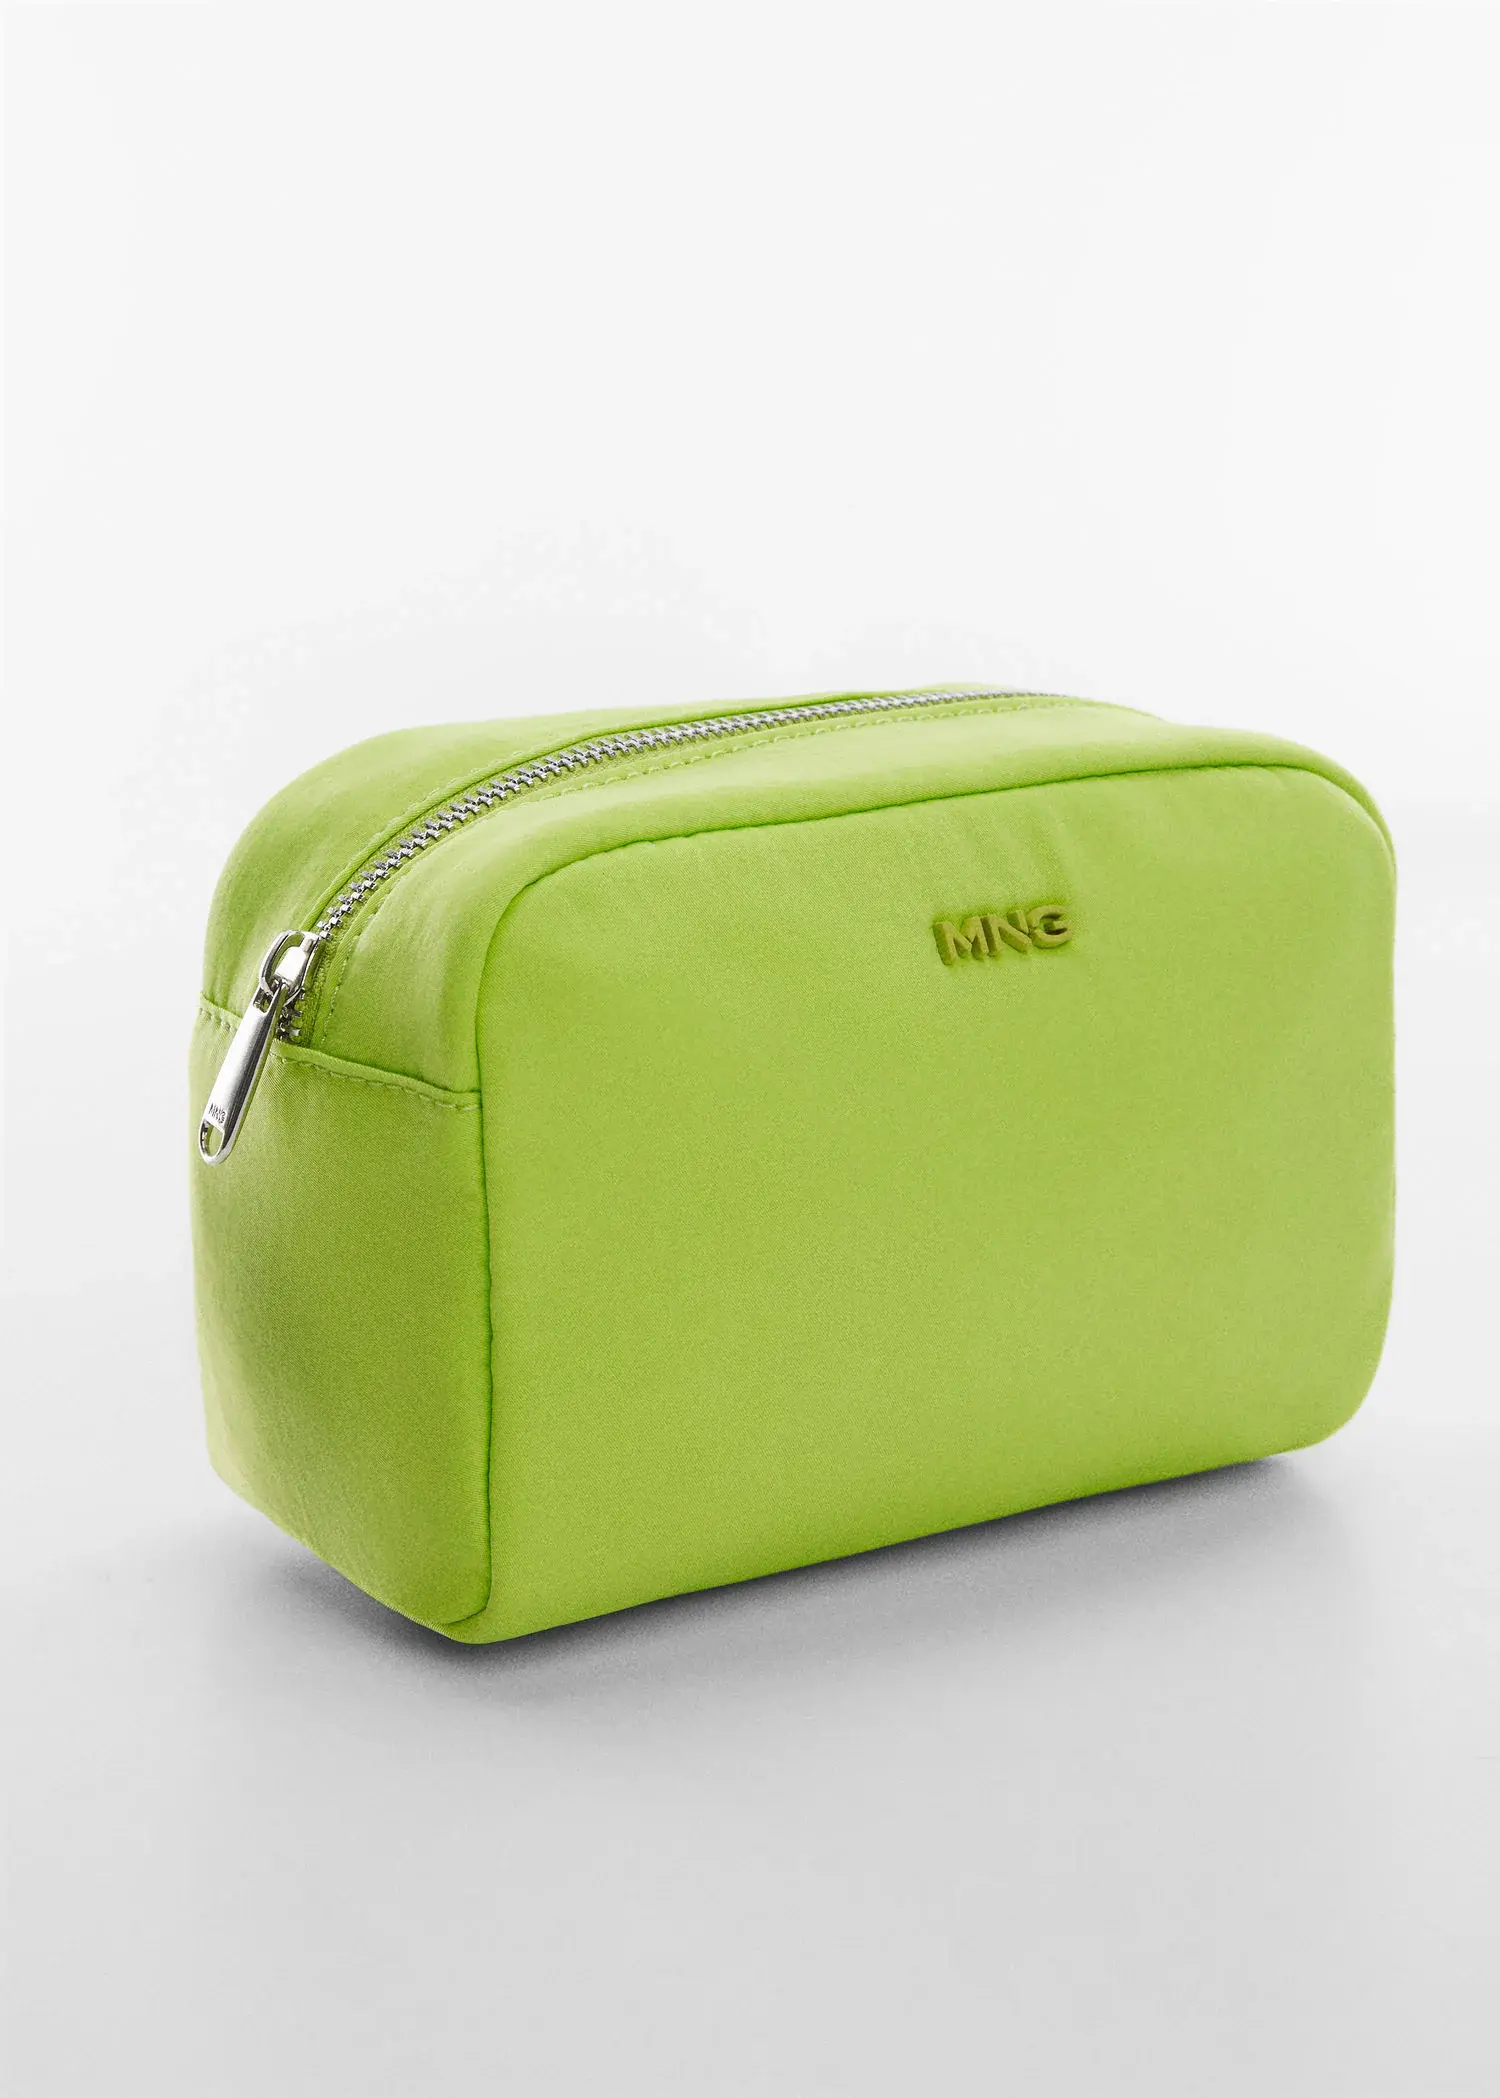 Mango Zipped toiletry bag with logo. a lime green bag sitting on top of a white table. 